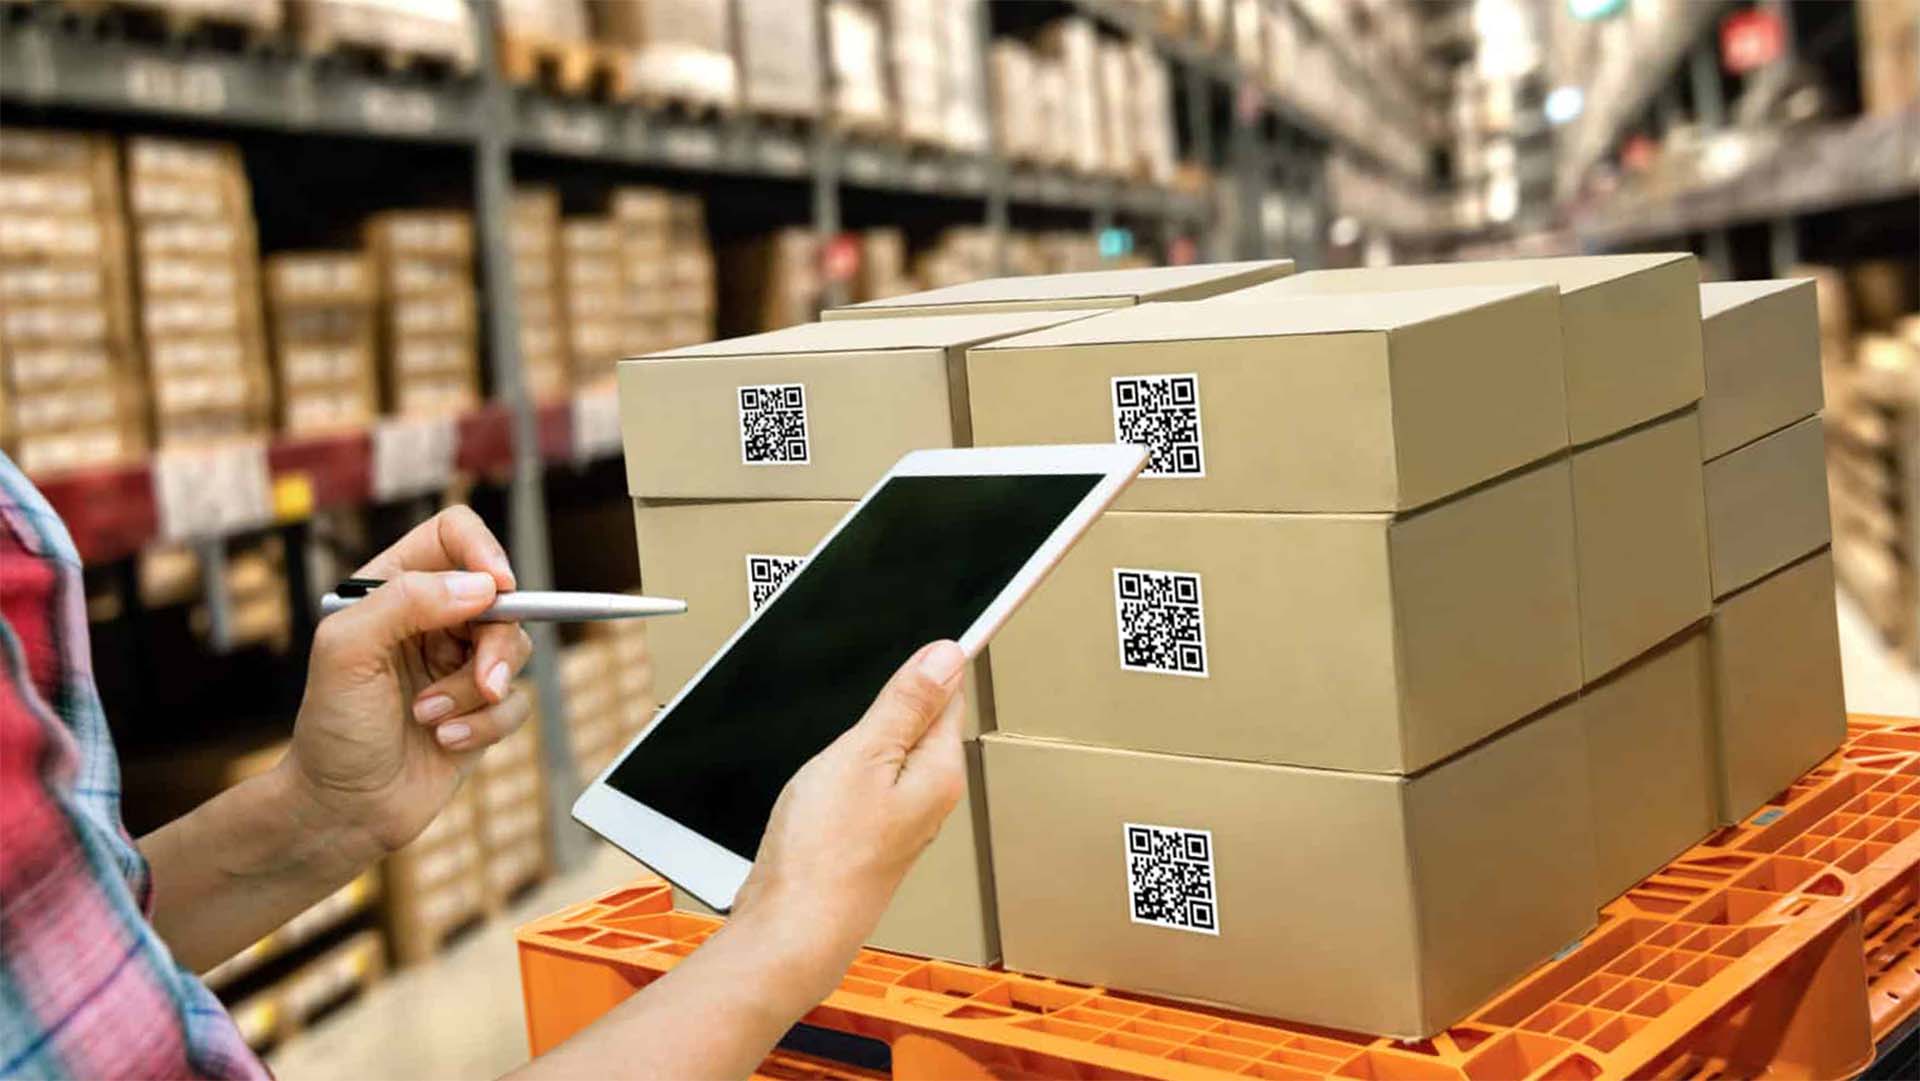 A warehouse worker using digital barcodes and mobile order tracking technology to process batch picks of orders.